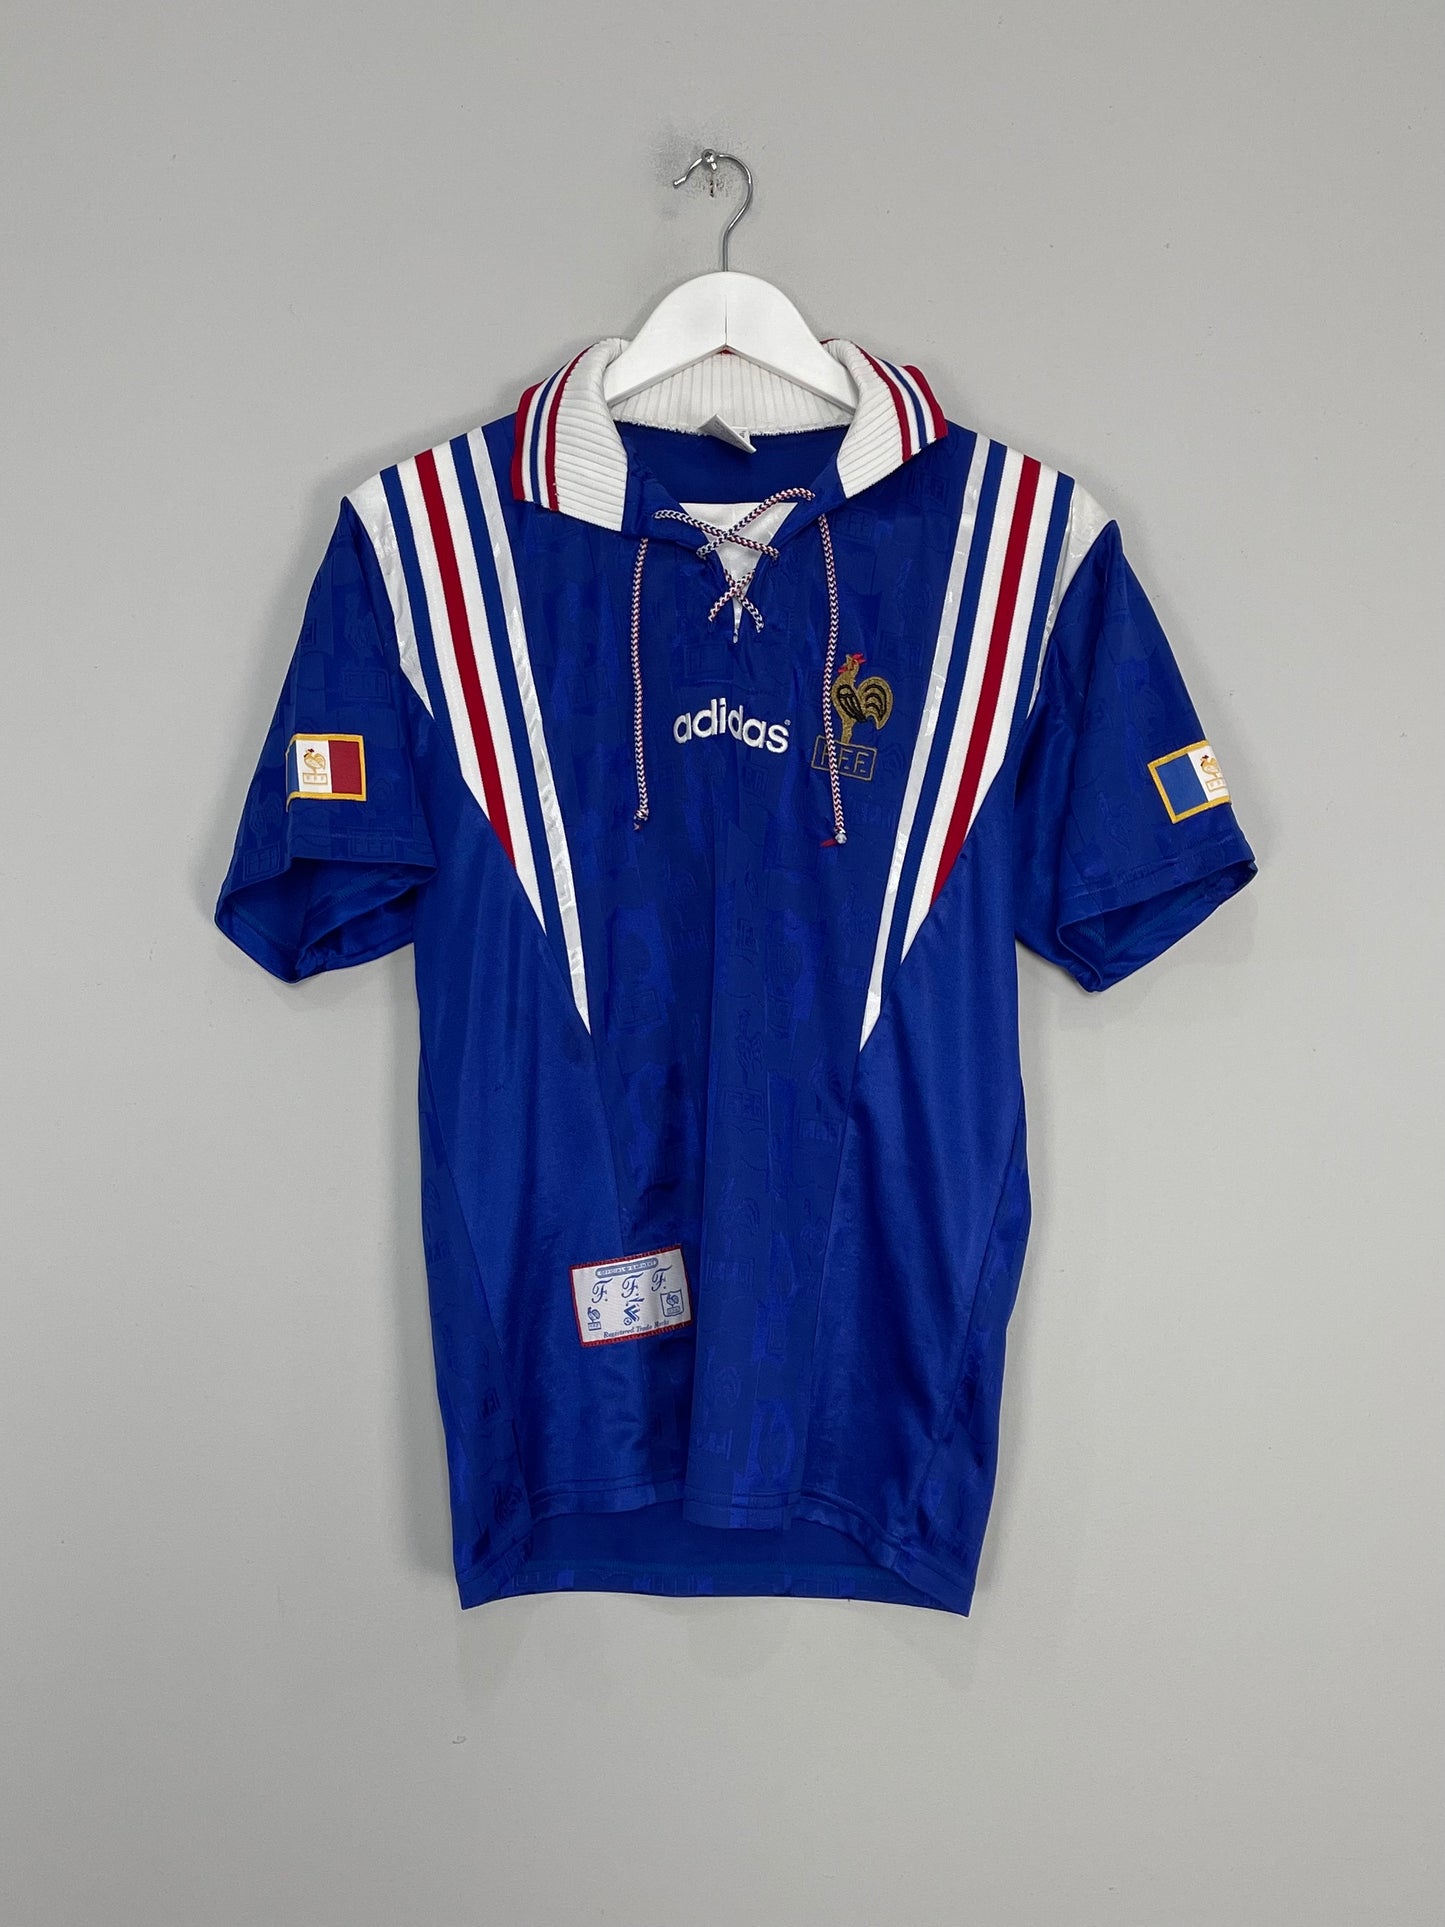 Image of the France shirt from the 1996/98 season